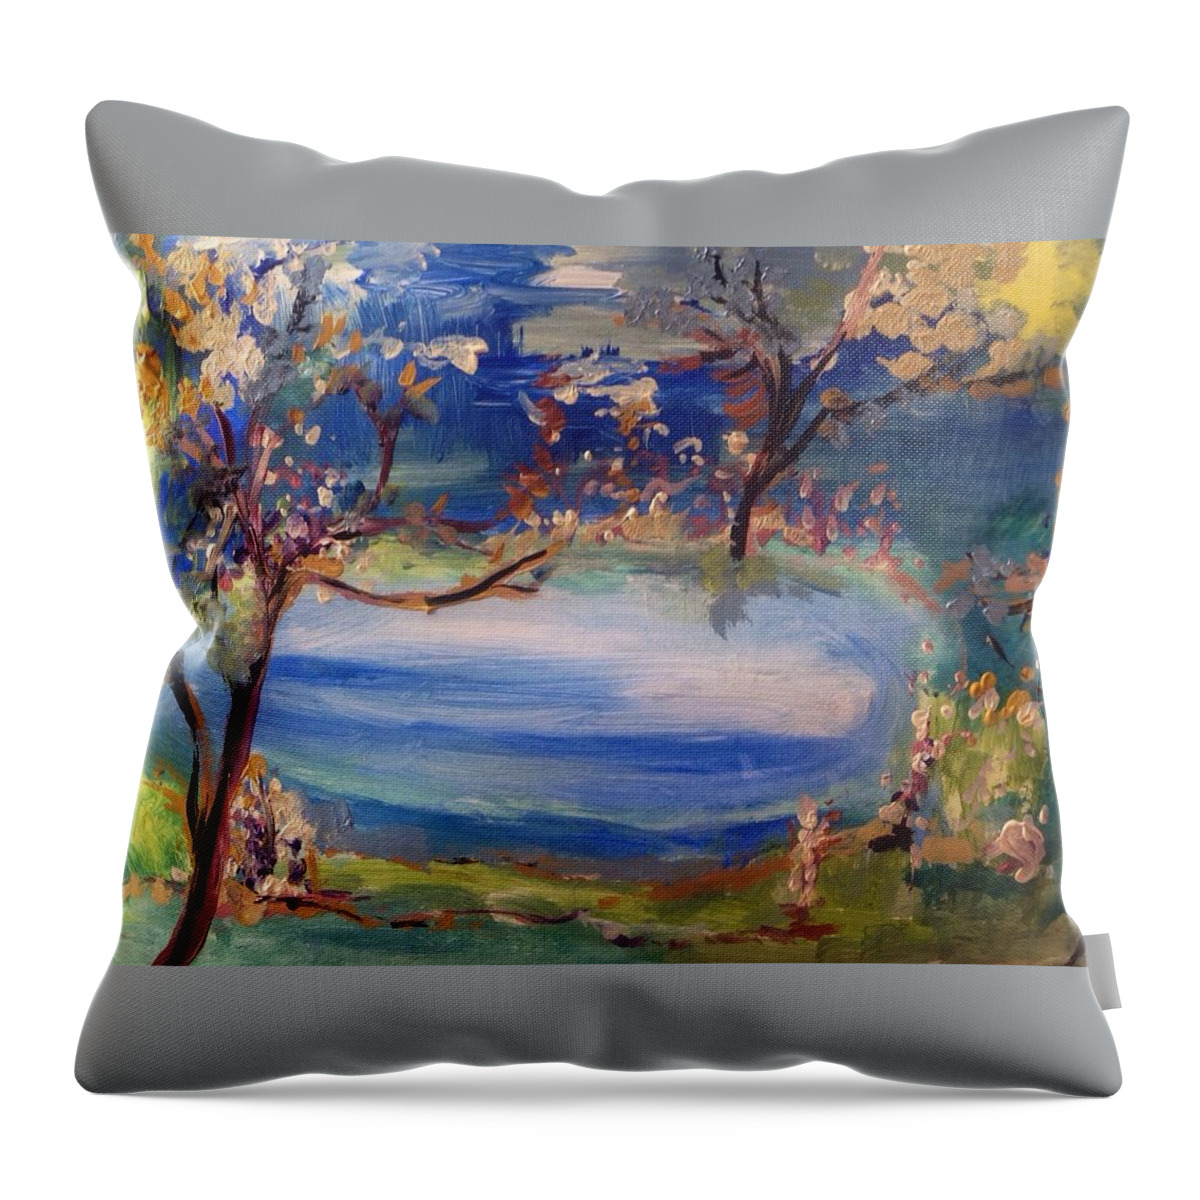 Empty Throw Pillow featuring the painting Empty dreams by Judith Desrosiers